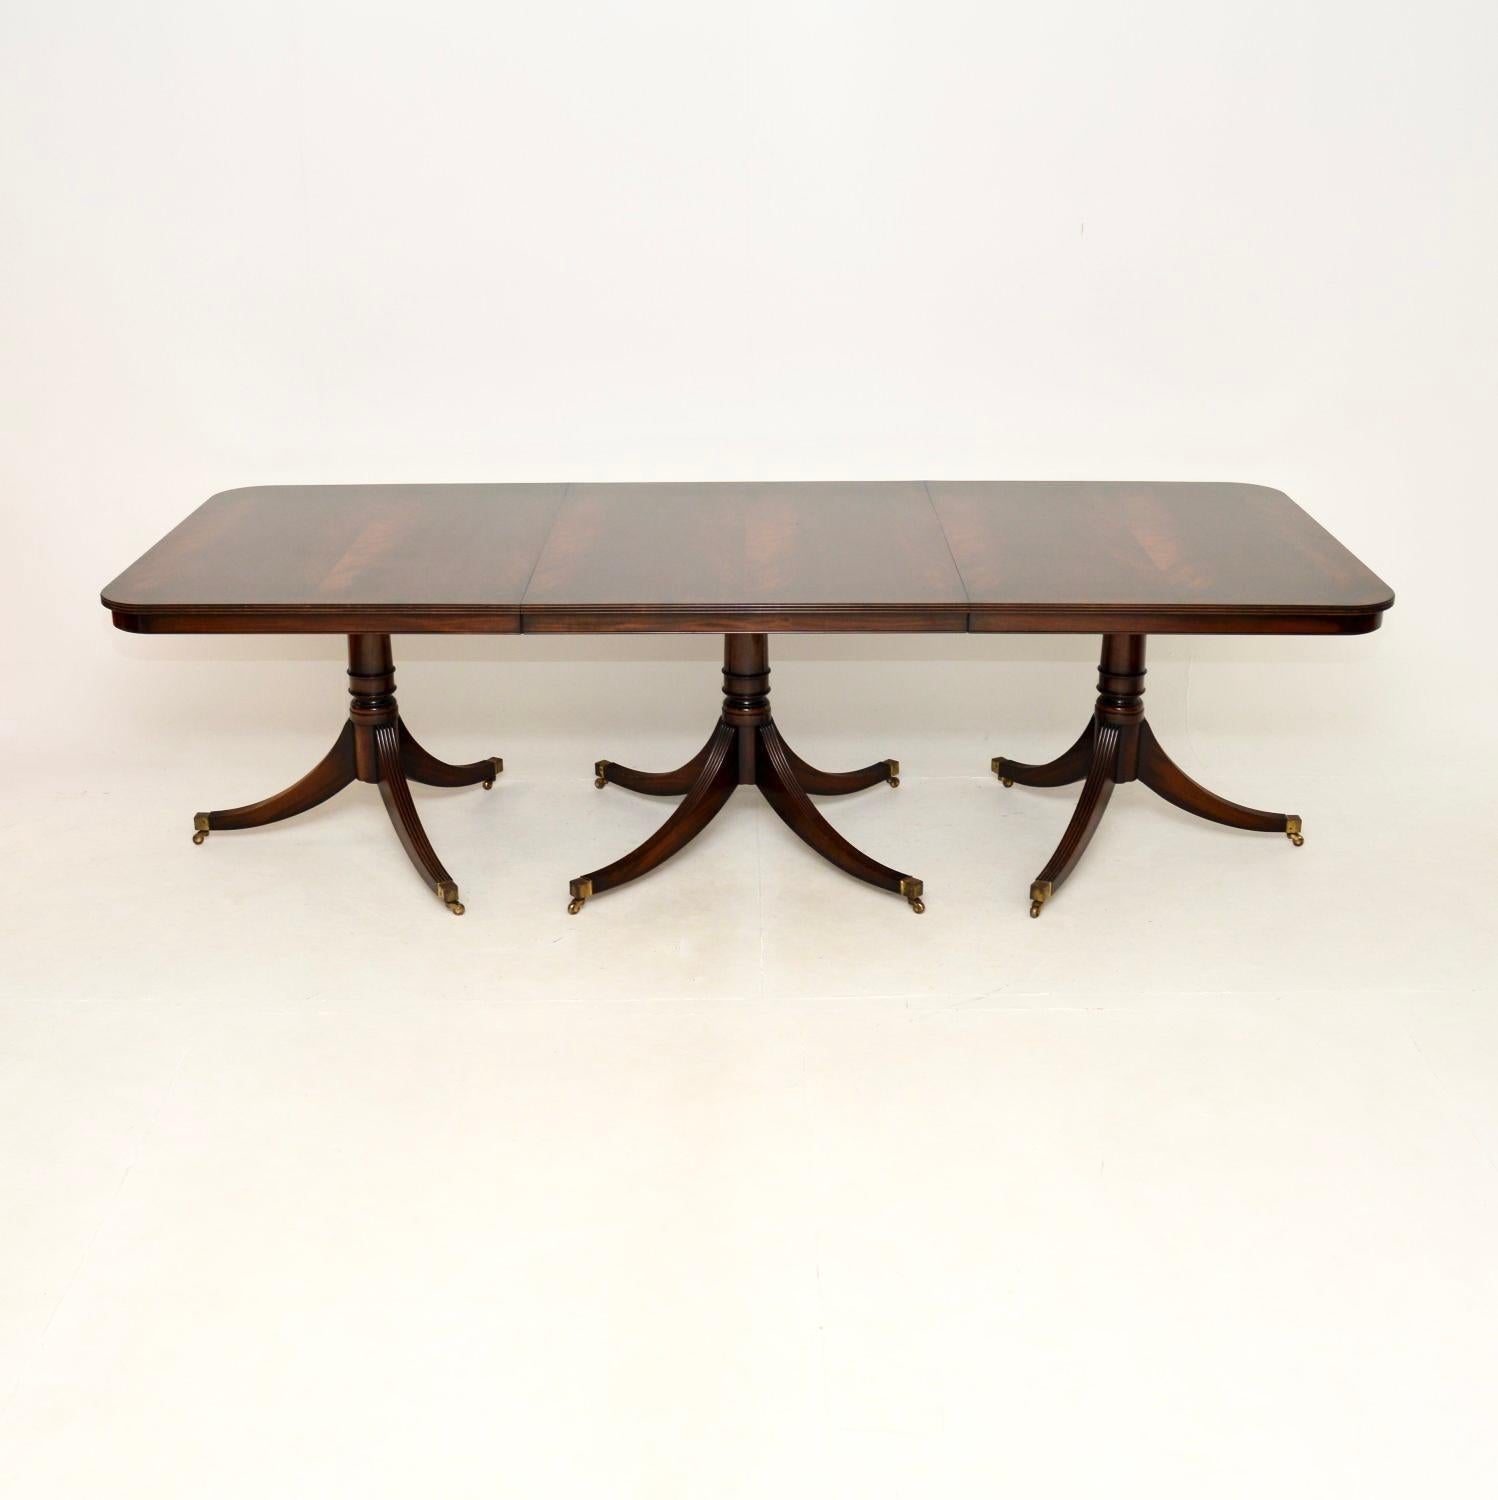 An extremely well made and very large antique Regency style extending dining table. This was made in England, it dates from around the 1950’s.

The quality is exceptional, this is very large and impressive, made to seat fourteen comfortably and